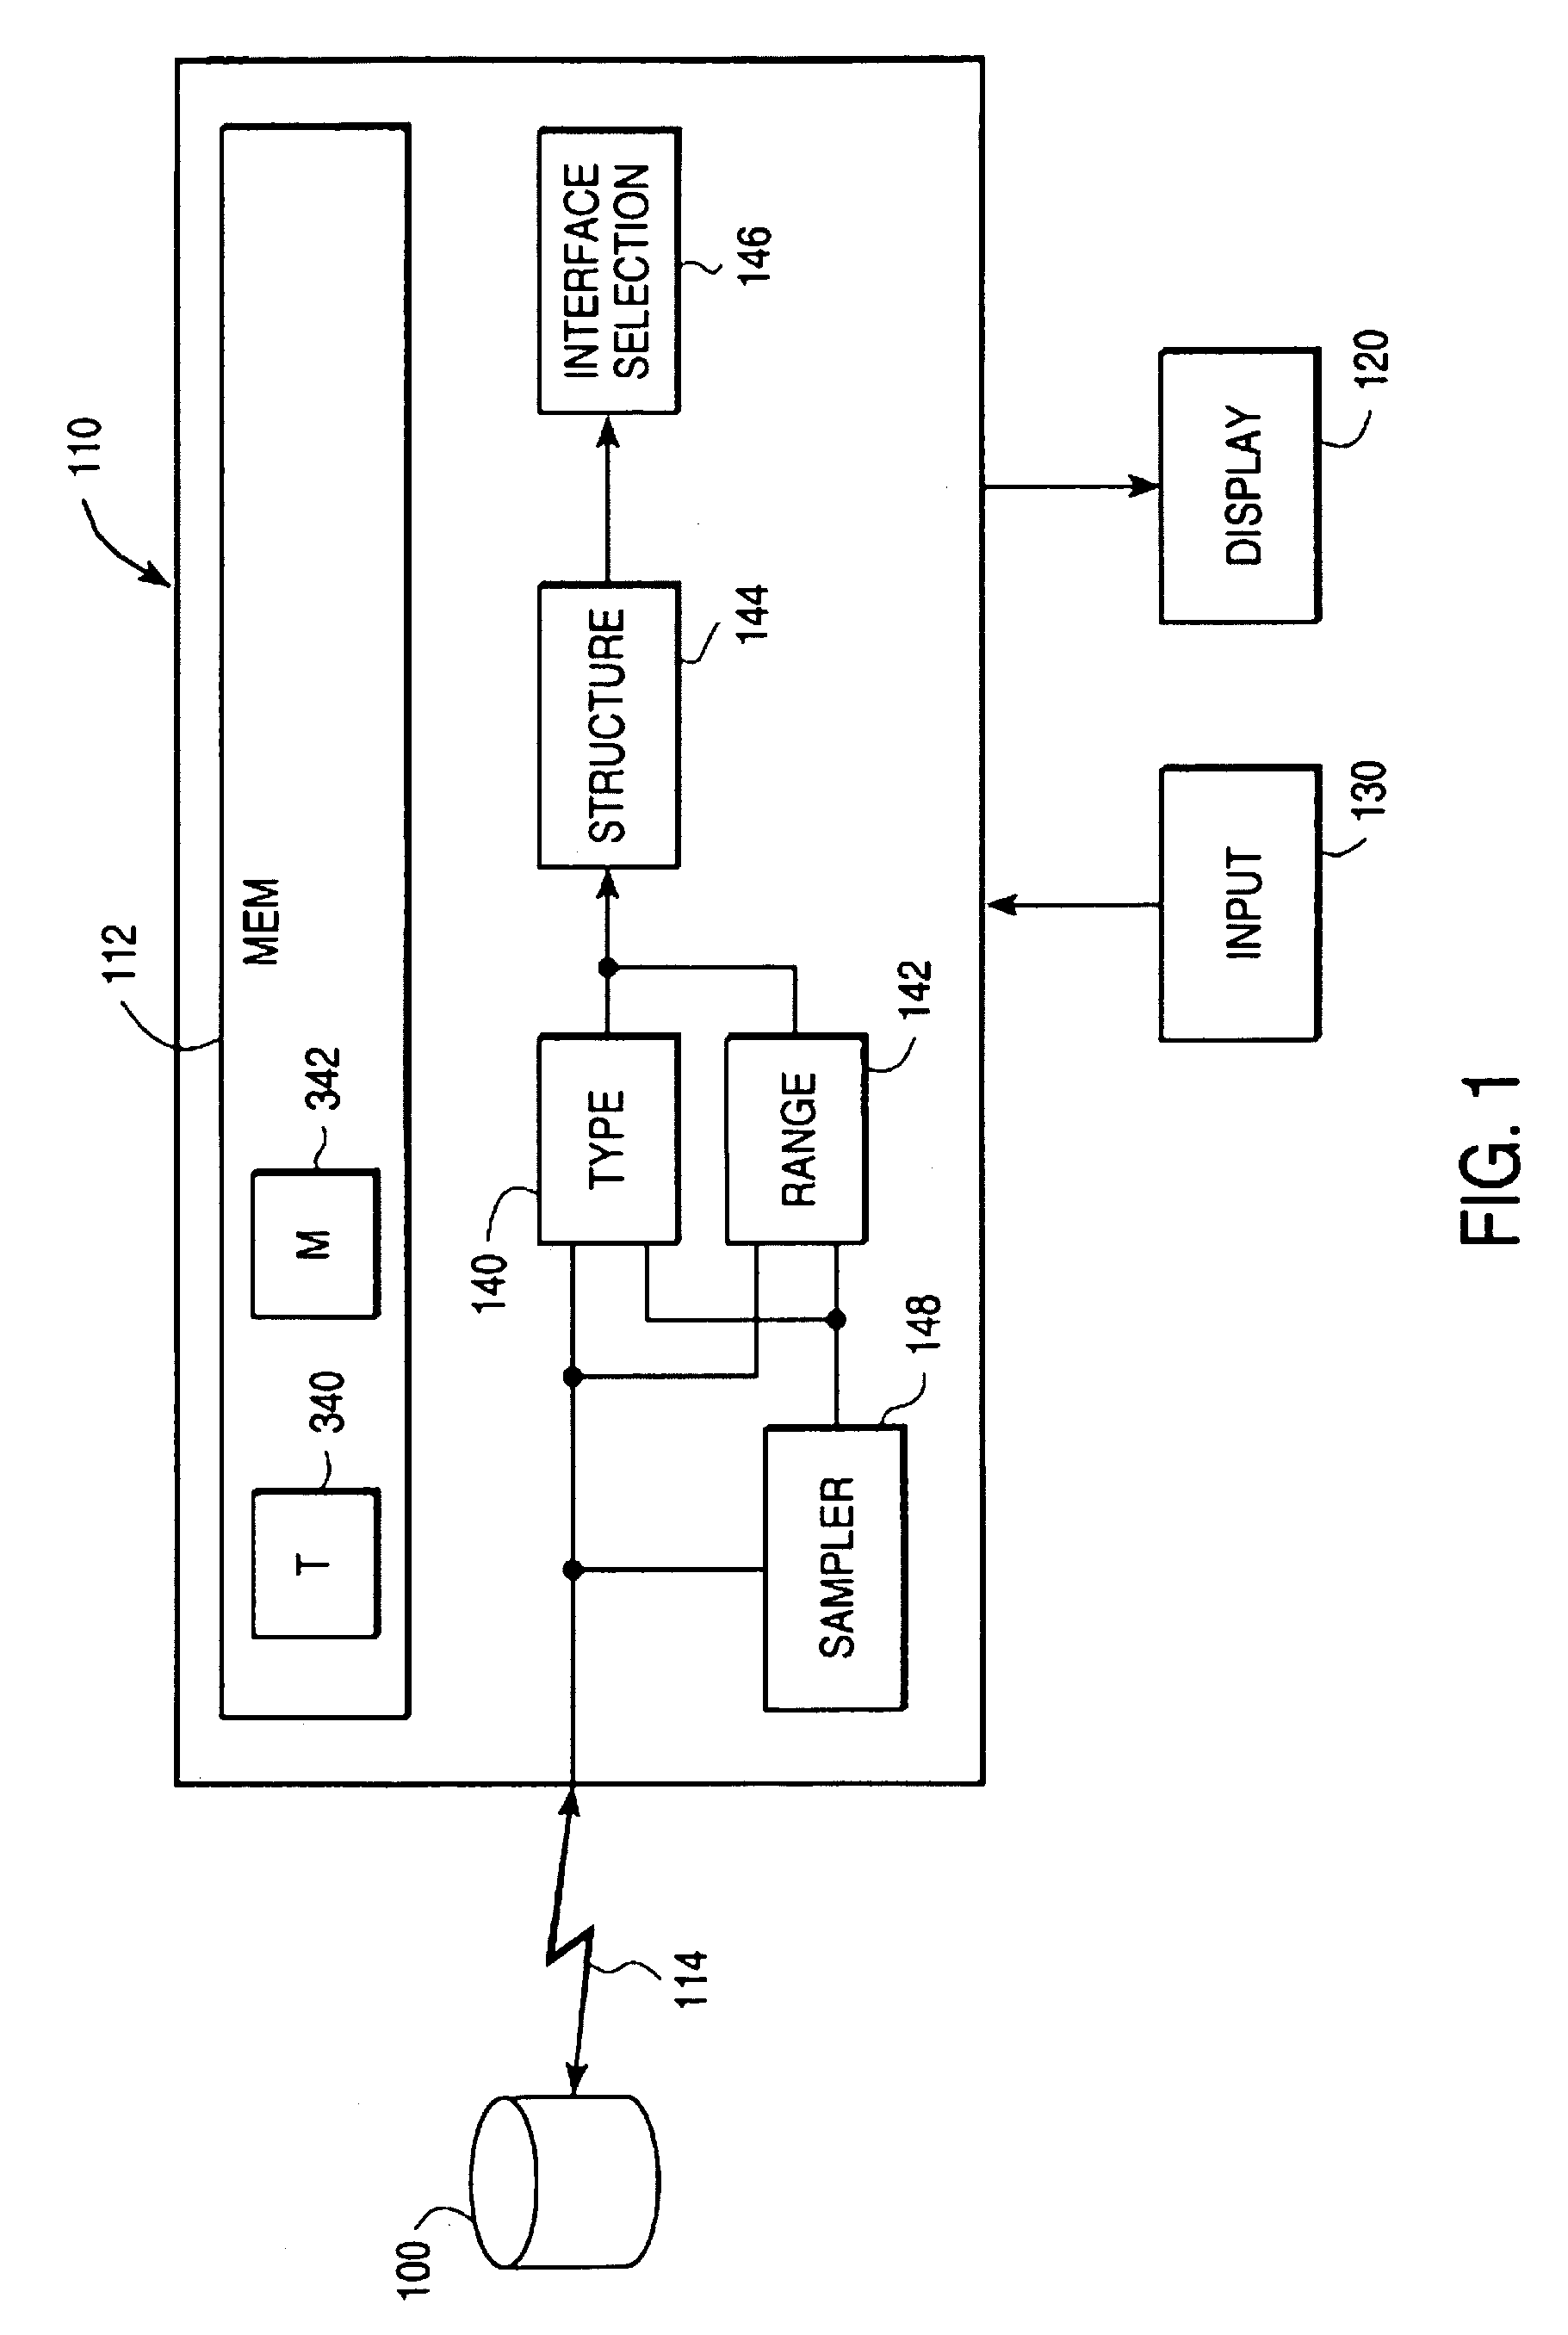 Data analysis system with automated query and visualization environment setup